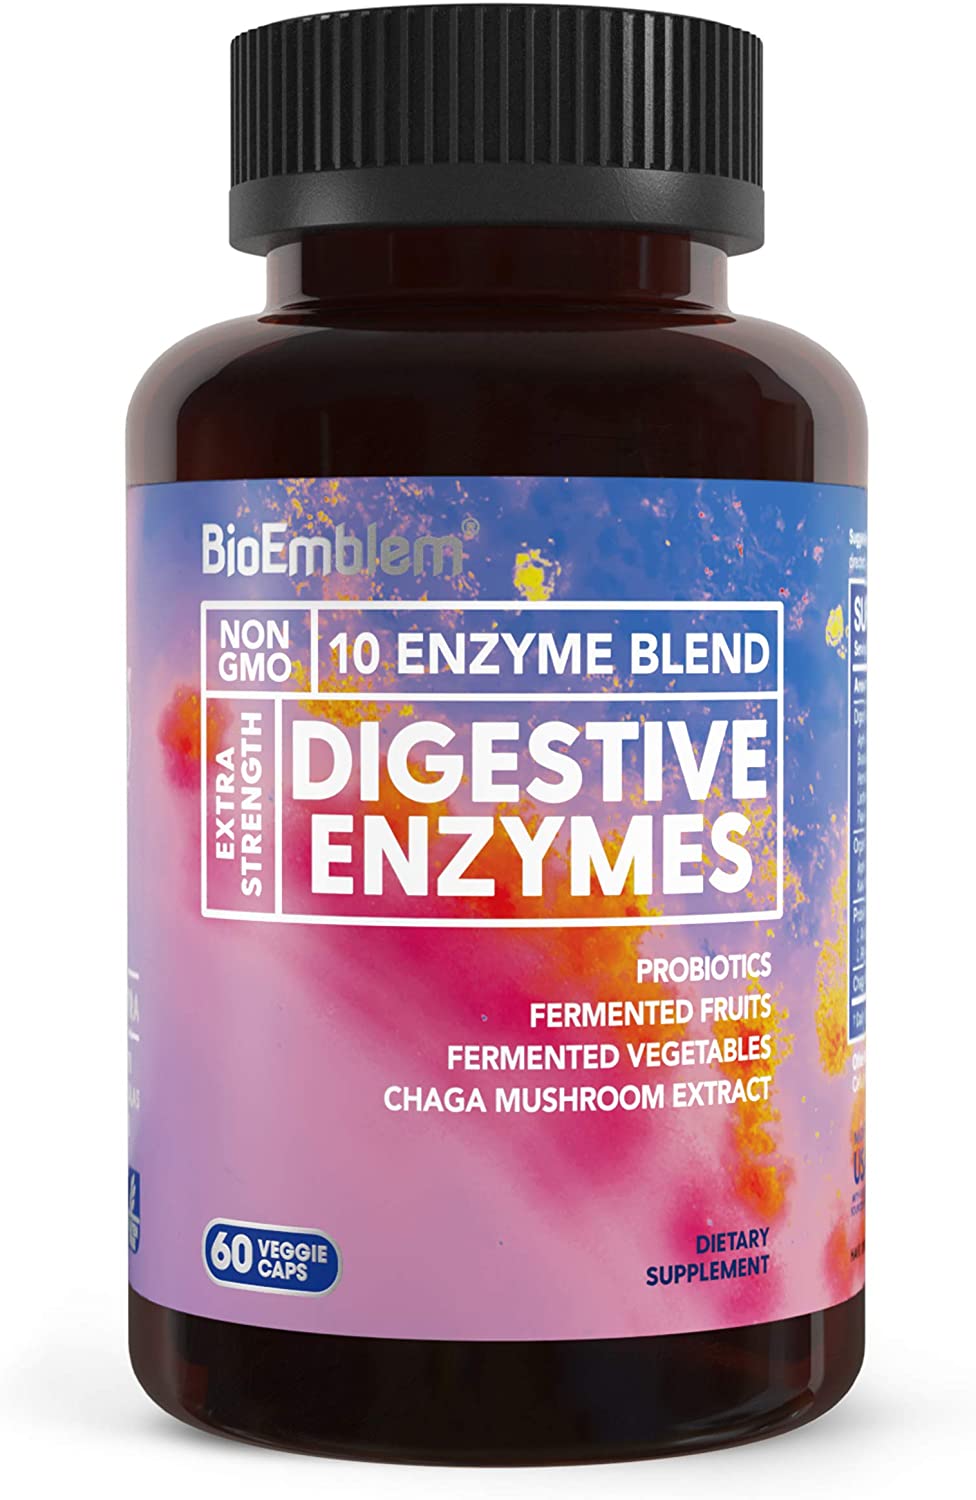 Digestive Enzymes with Probiotics and Fermented Fruits, Clearance Sale Save up to 72%! $4.99